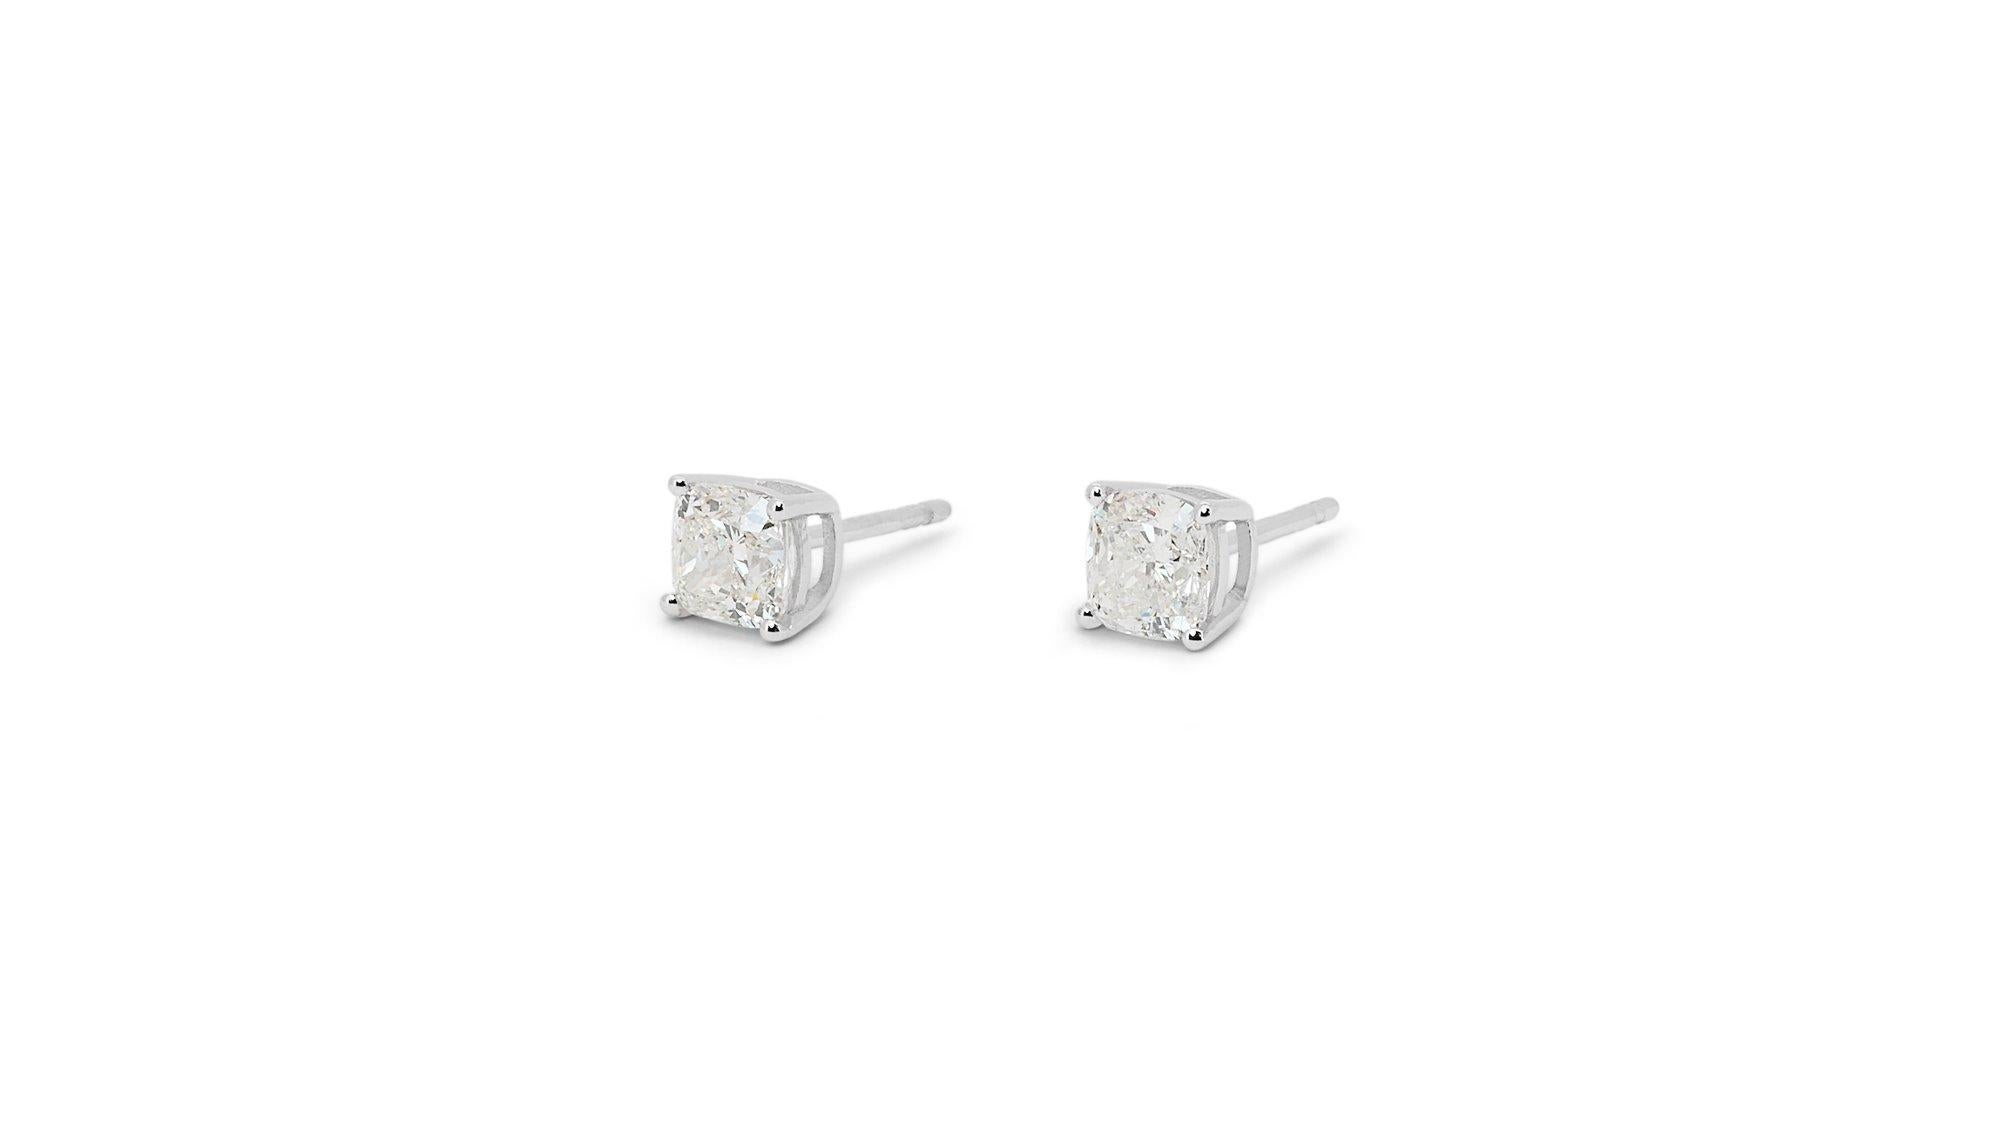 Gorgeous 18k White Gold Stud Earrings with 2.01 ct Natural Diamonds AIG Cert 1